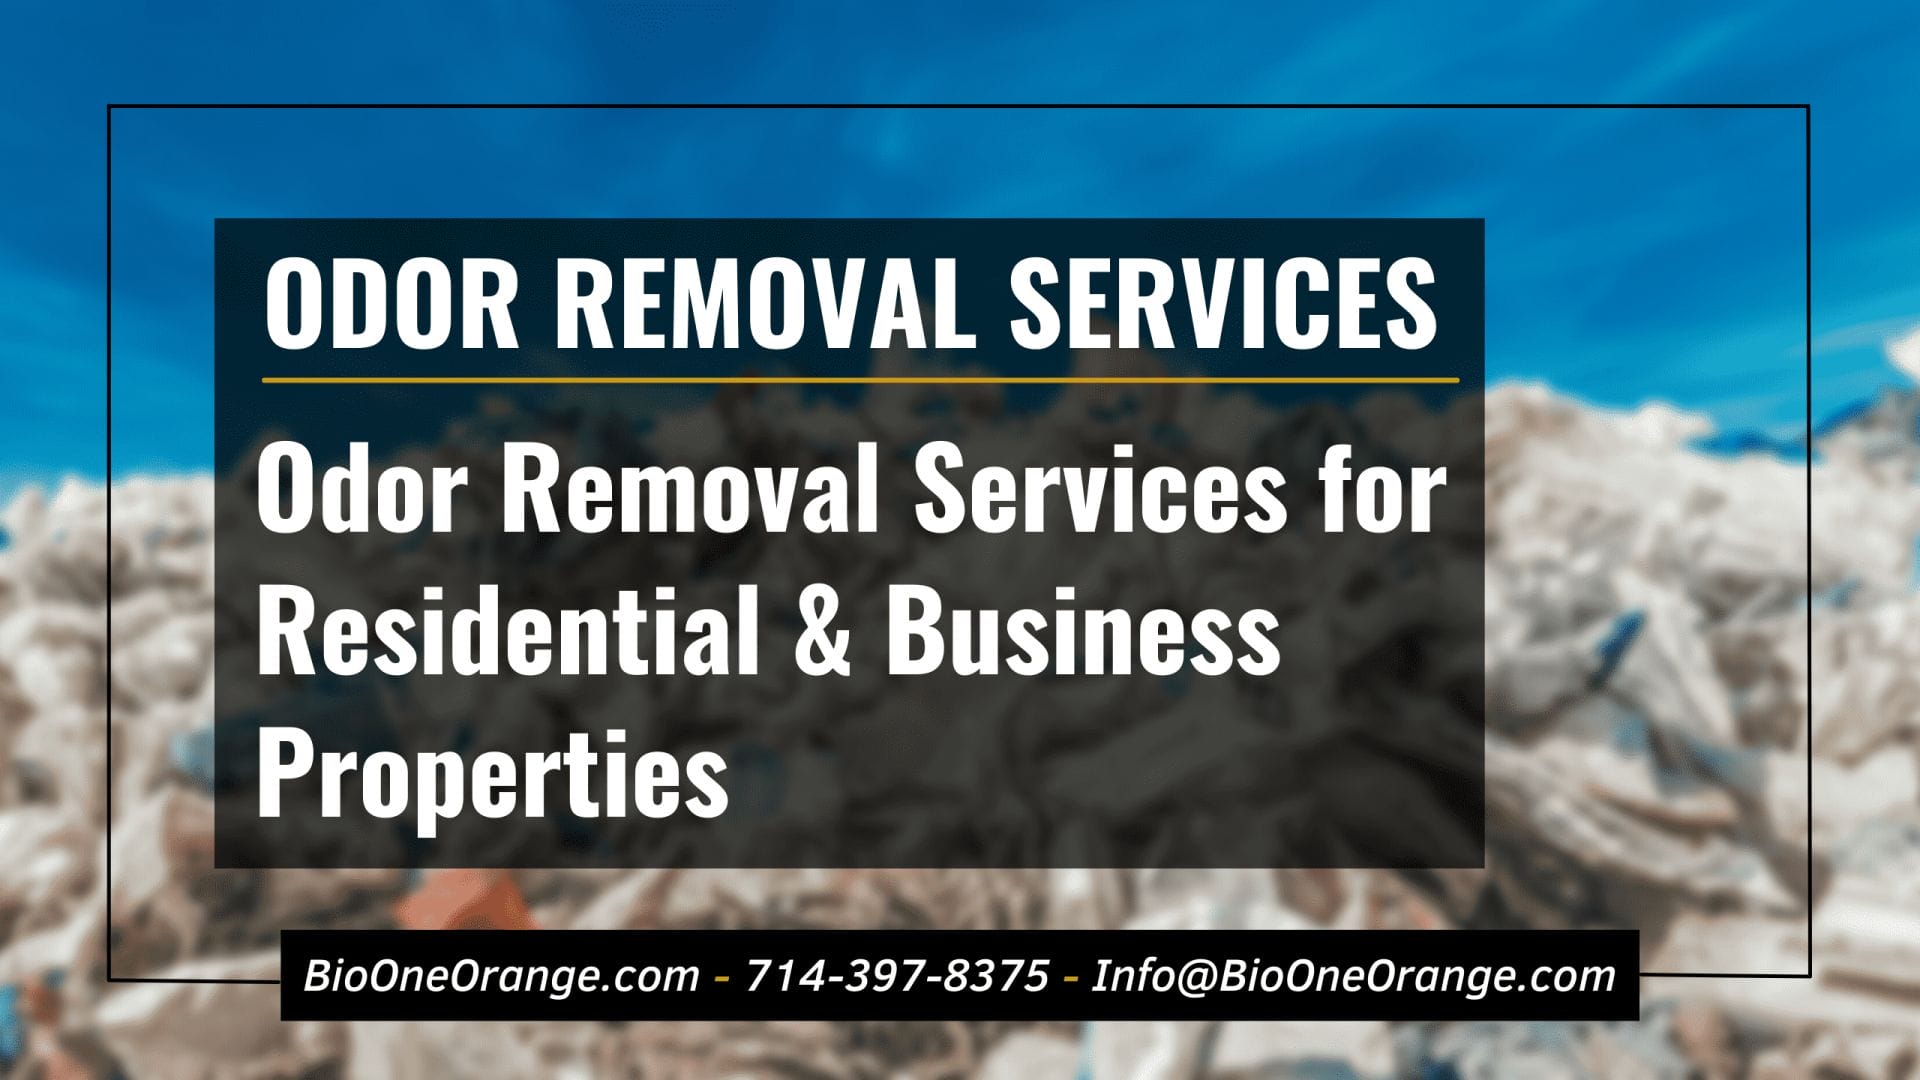 Odor Removal Services for Residential & Business Properties - Photo credit: @edophoto - Freepik.